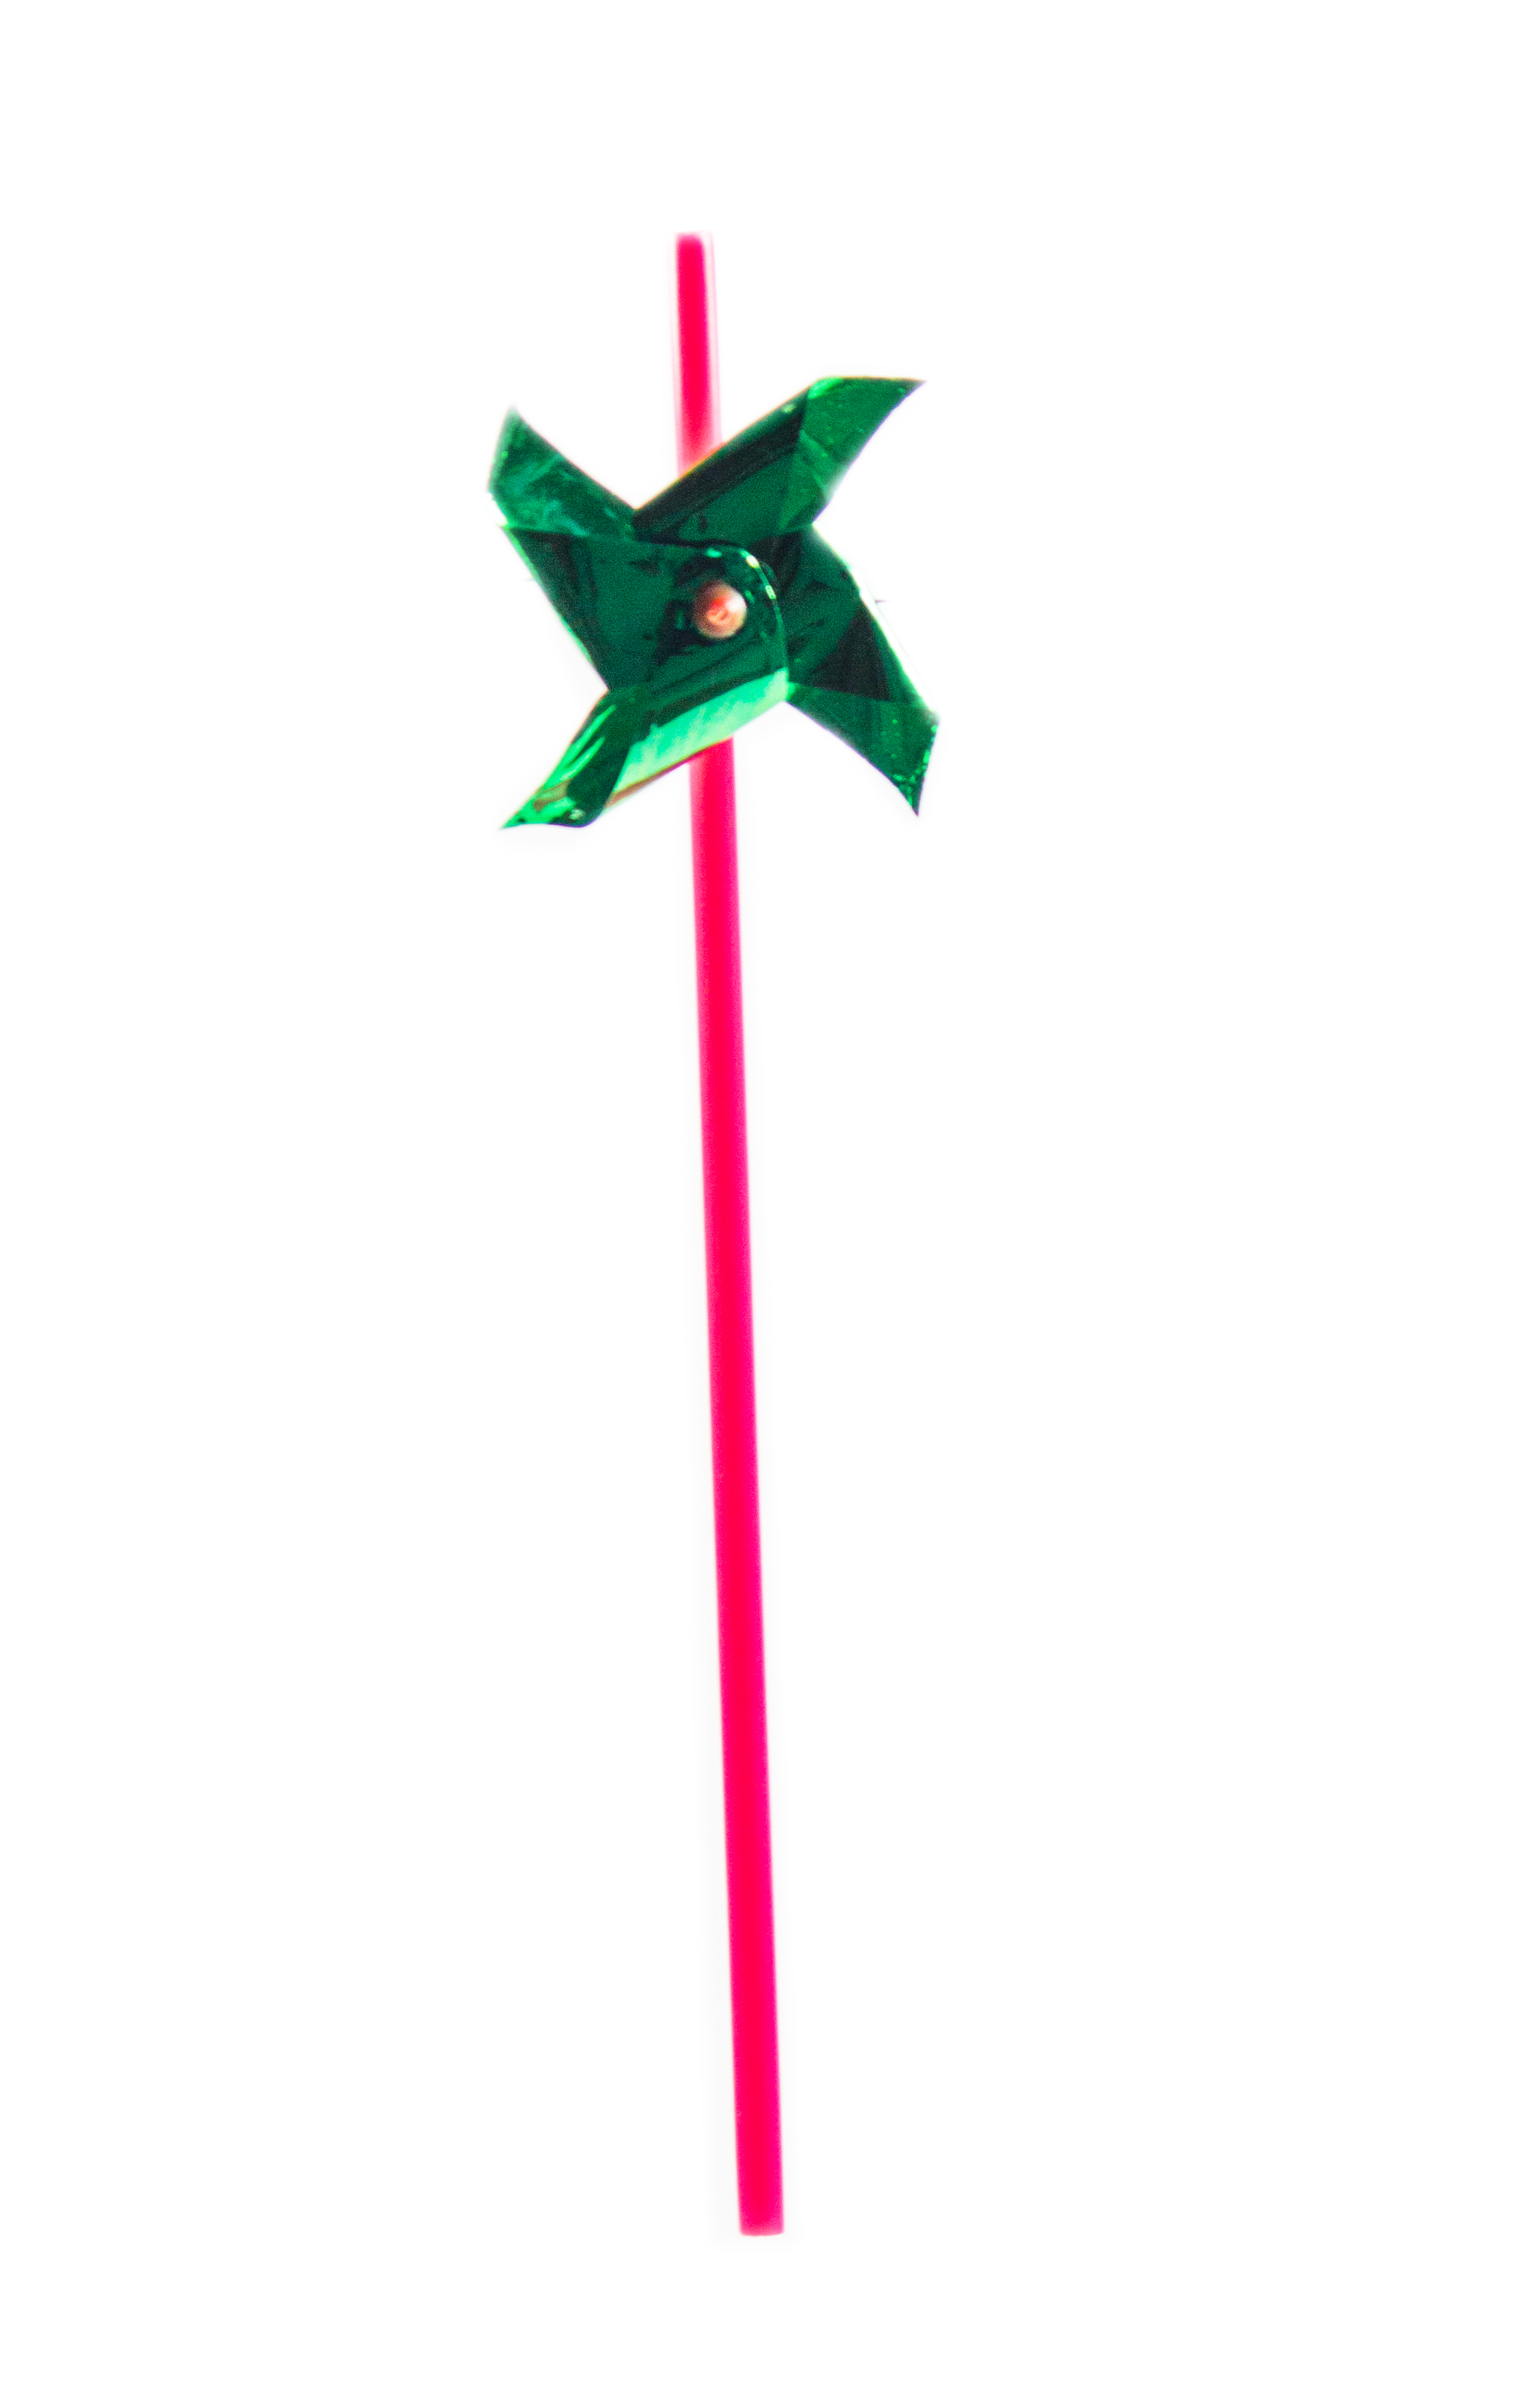 8" Pink Hard Straight Green Plastic Pinwheel Straws Case of 48ct total- Straw is Pink